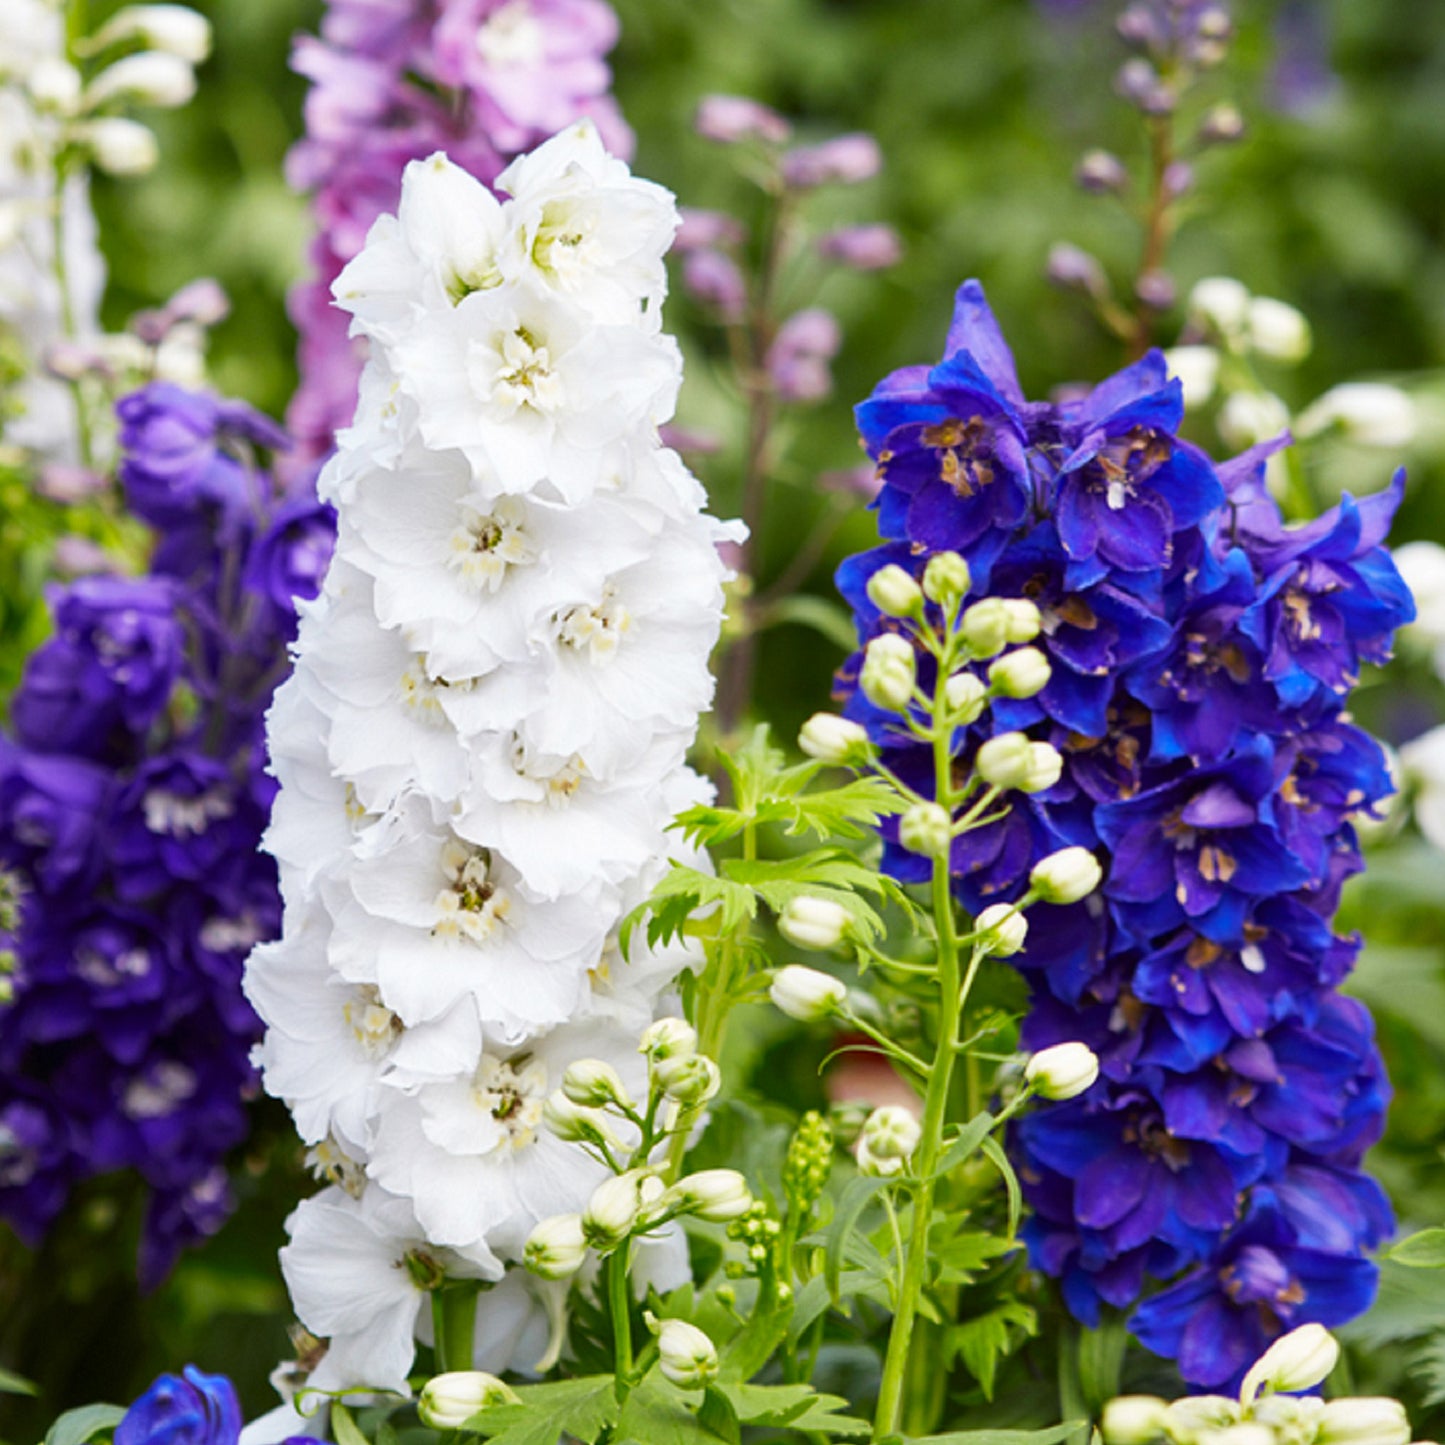 Pacific Giants Mixed Colors Delphinium seeds fully matured and blooming gorgeously regal colors of blues, purples and whites.